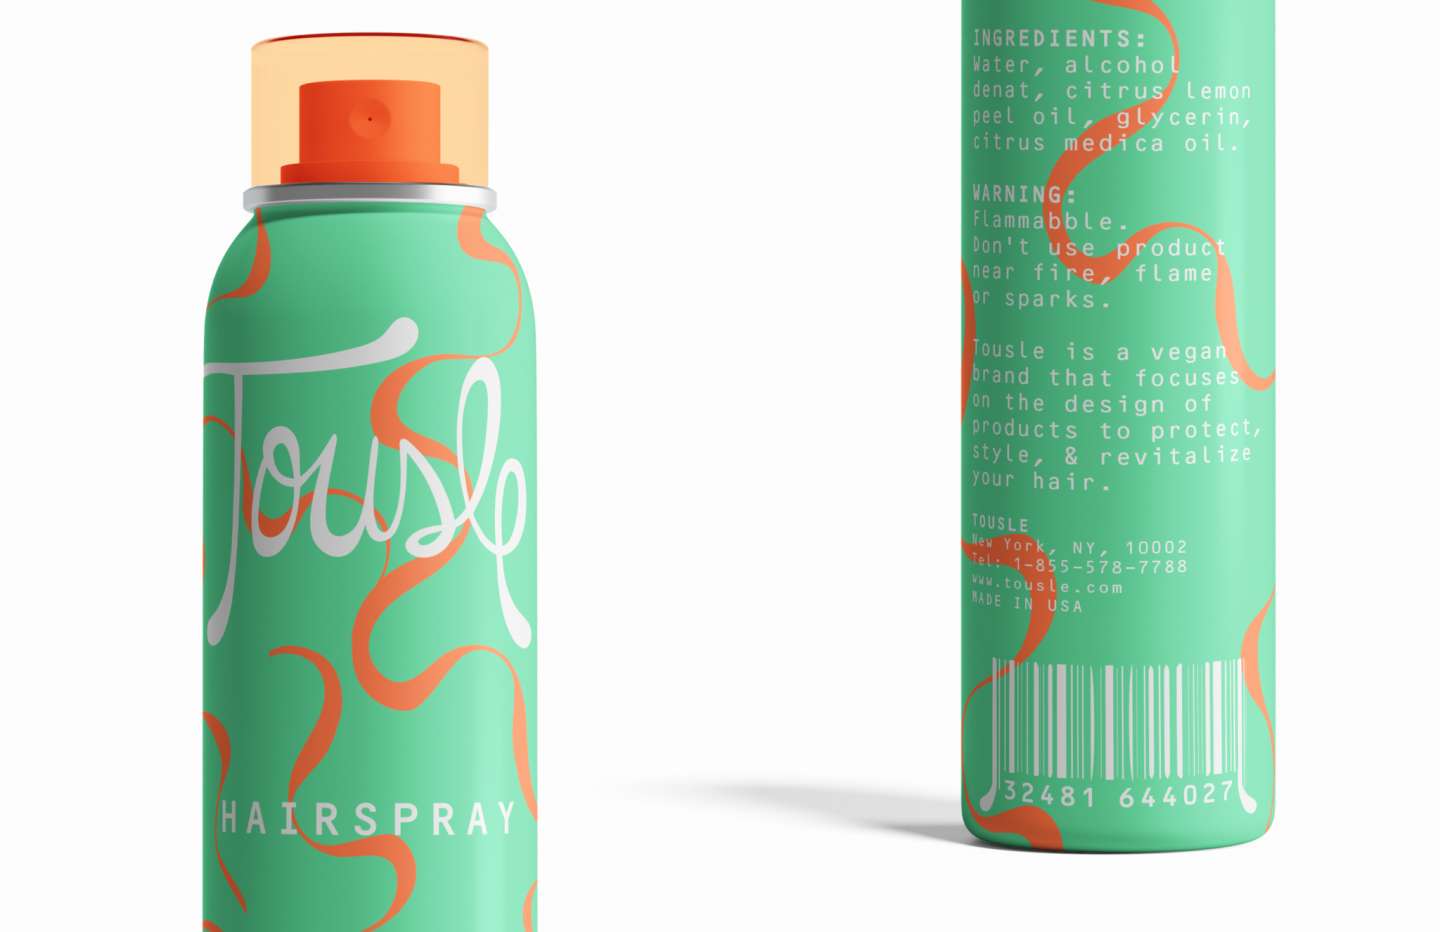 Tousle: Packaging